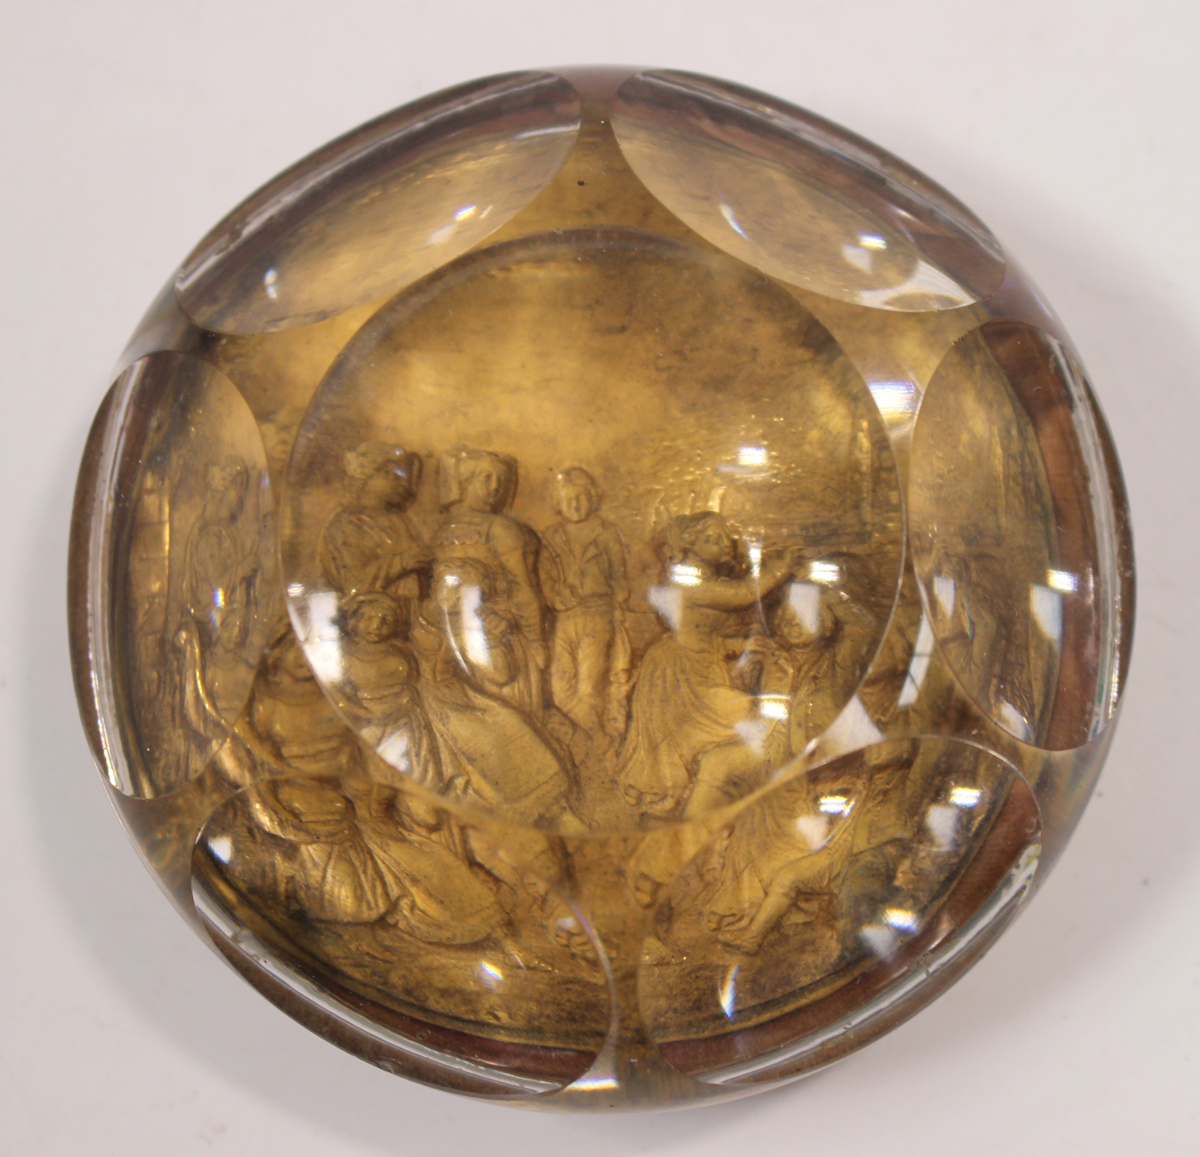 A Pinchbeck faceted glass paperweight, 19th century, depicting a figural pastoral scene, diameter